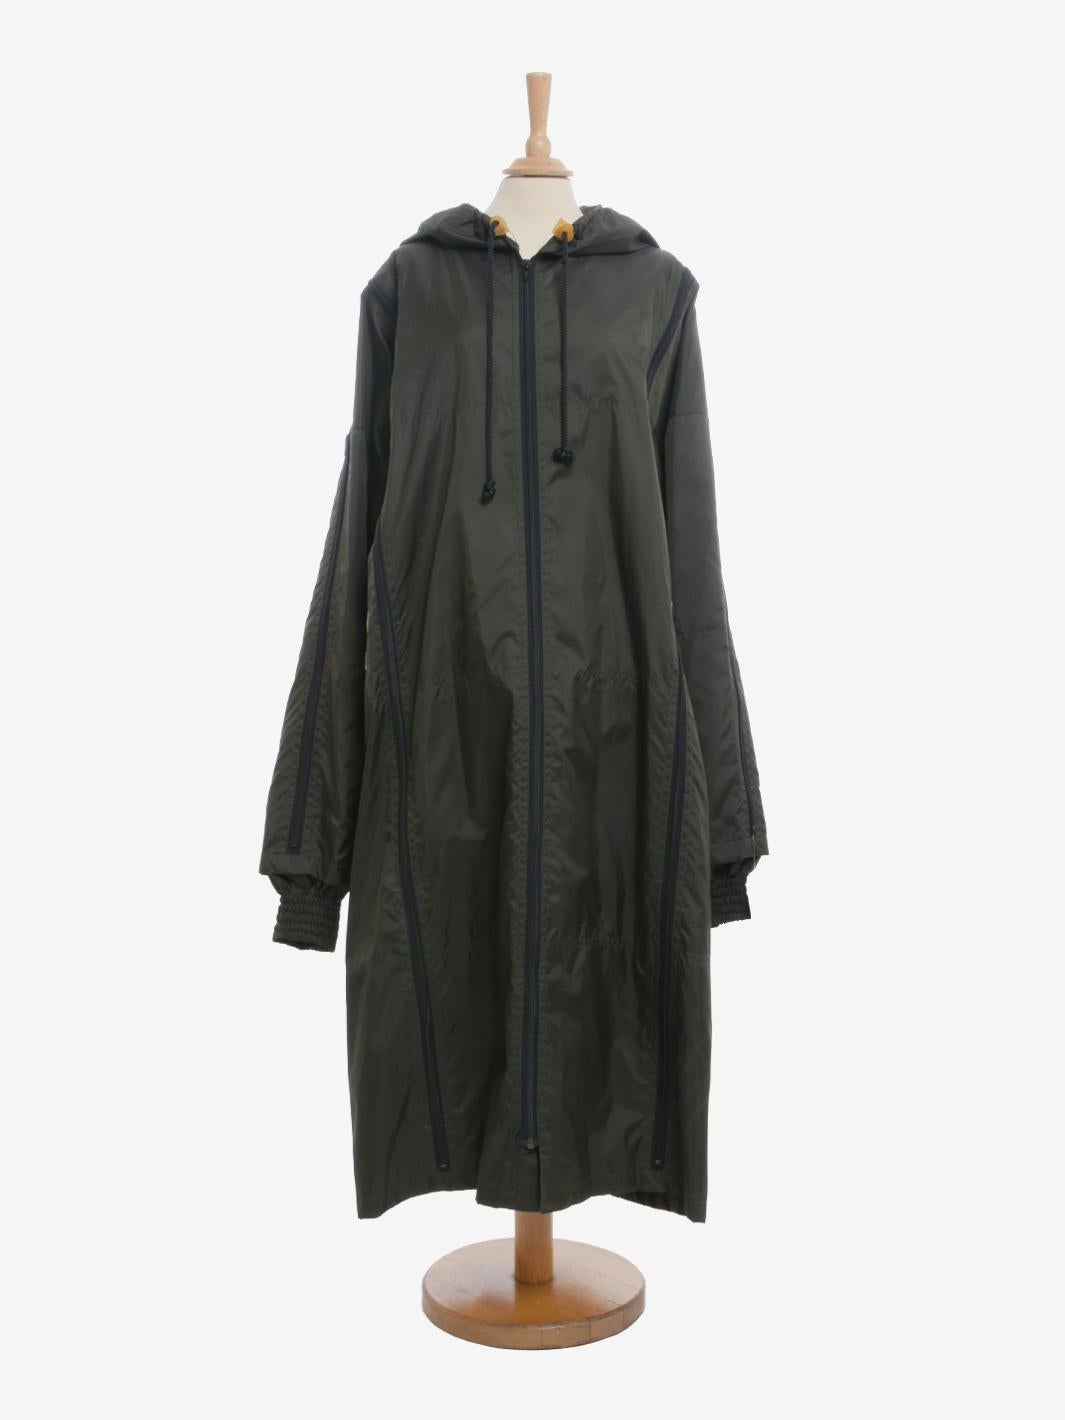 Final Home Trenchcoat is a raincoat by Japanese designer Kosuke Tsumura. Final Home was born in the 1990s and already indicates from its name the idea behind the design: to provide an ultra-practical garment that can at the same time transform into